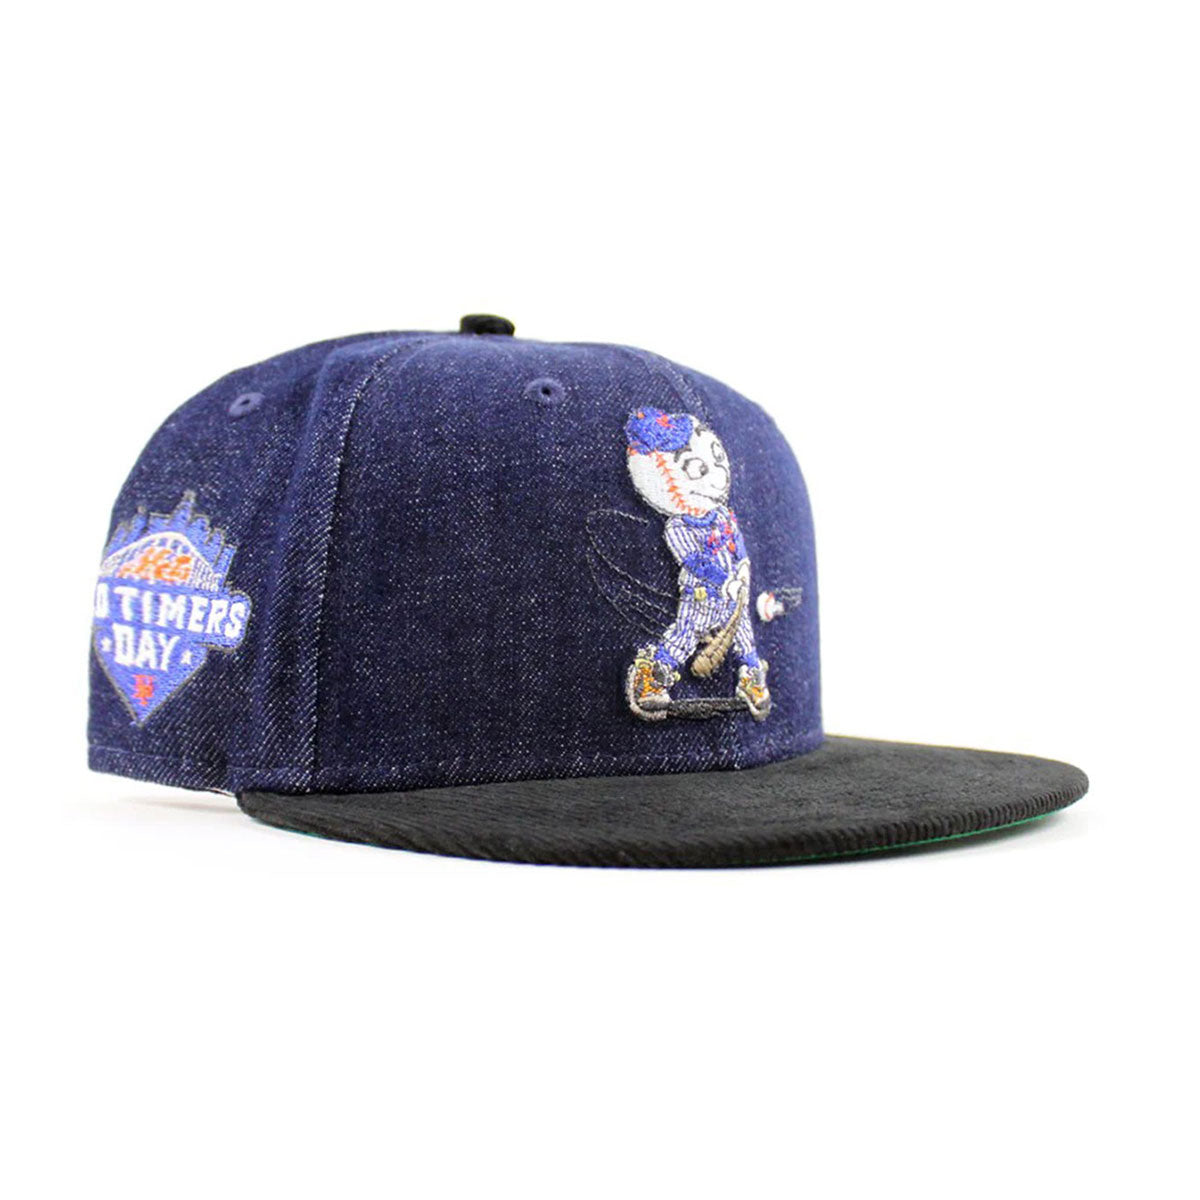 NEW ERA New York Mets - 59FIFTY Old Timers Day Patch Navy Denim